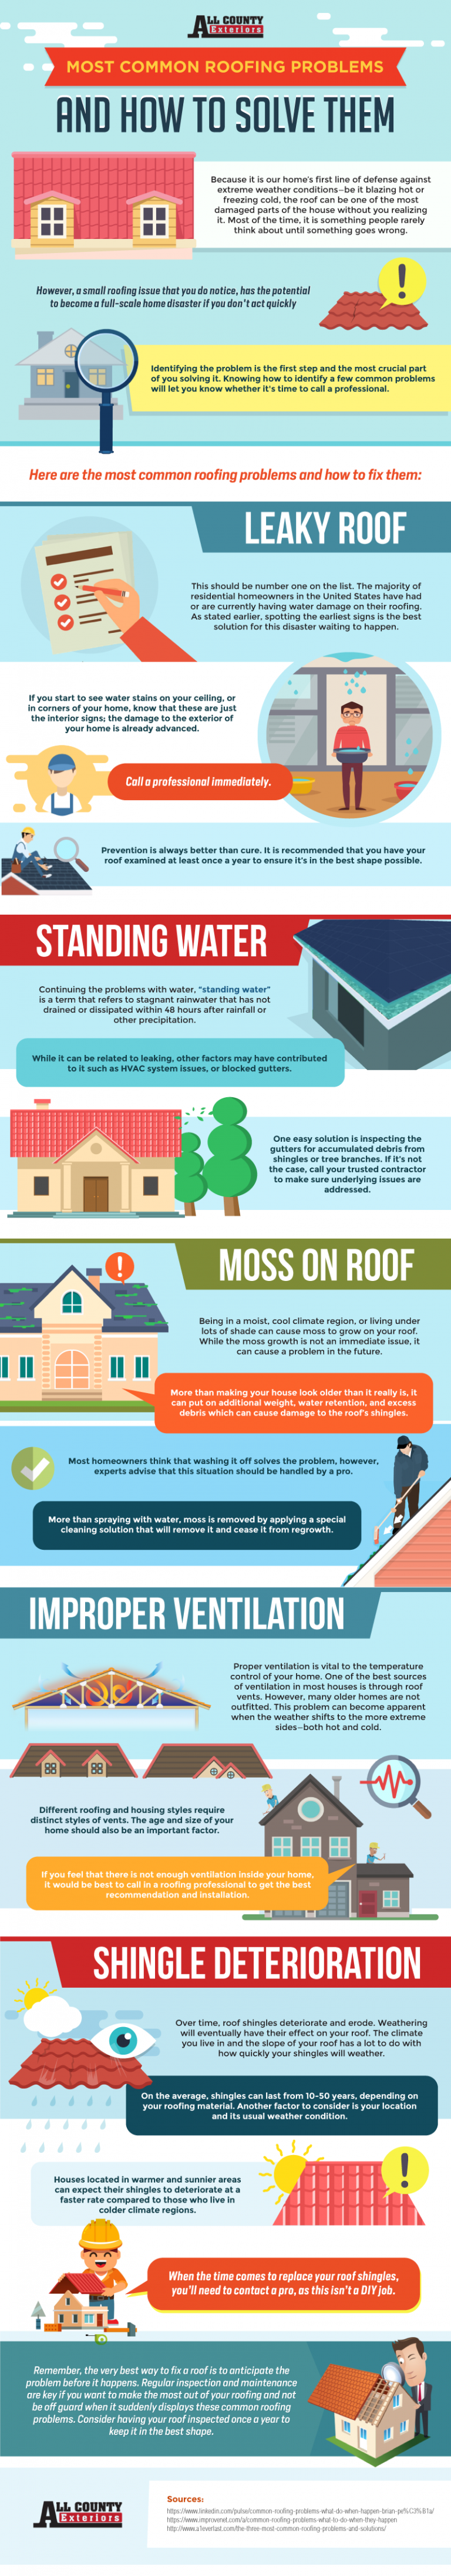 Roof Problems And Best Solutions InfoGraphic